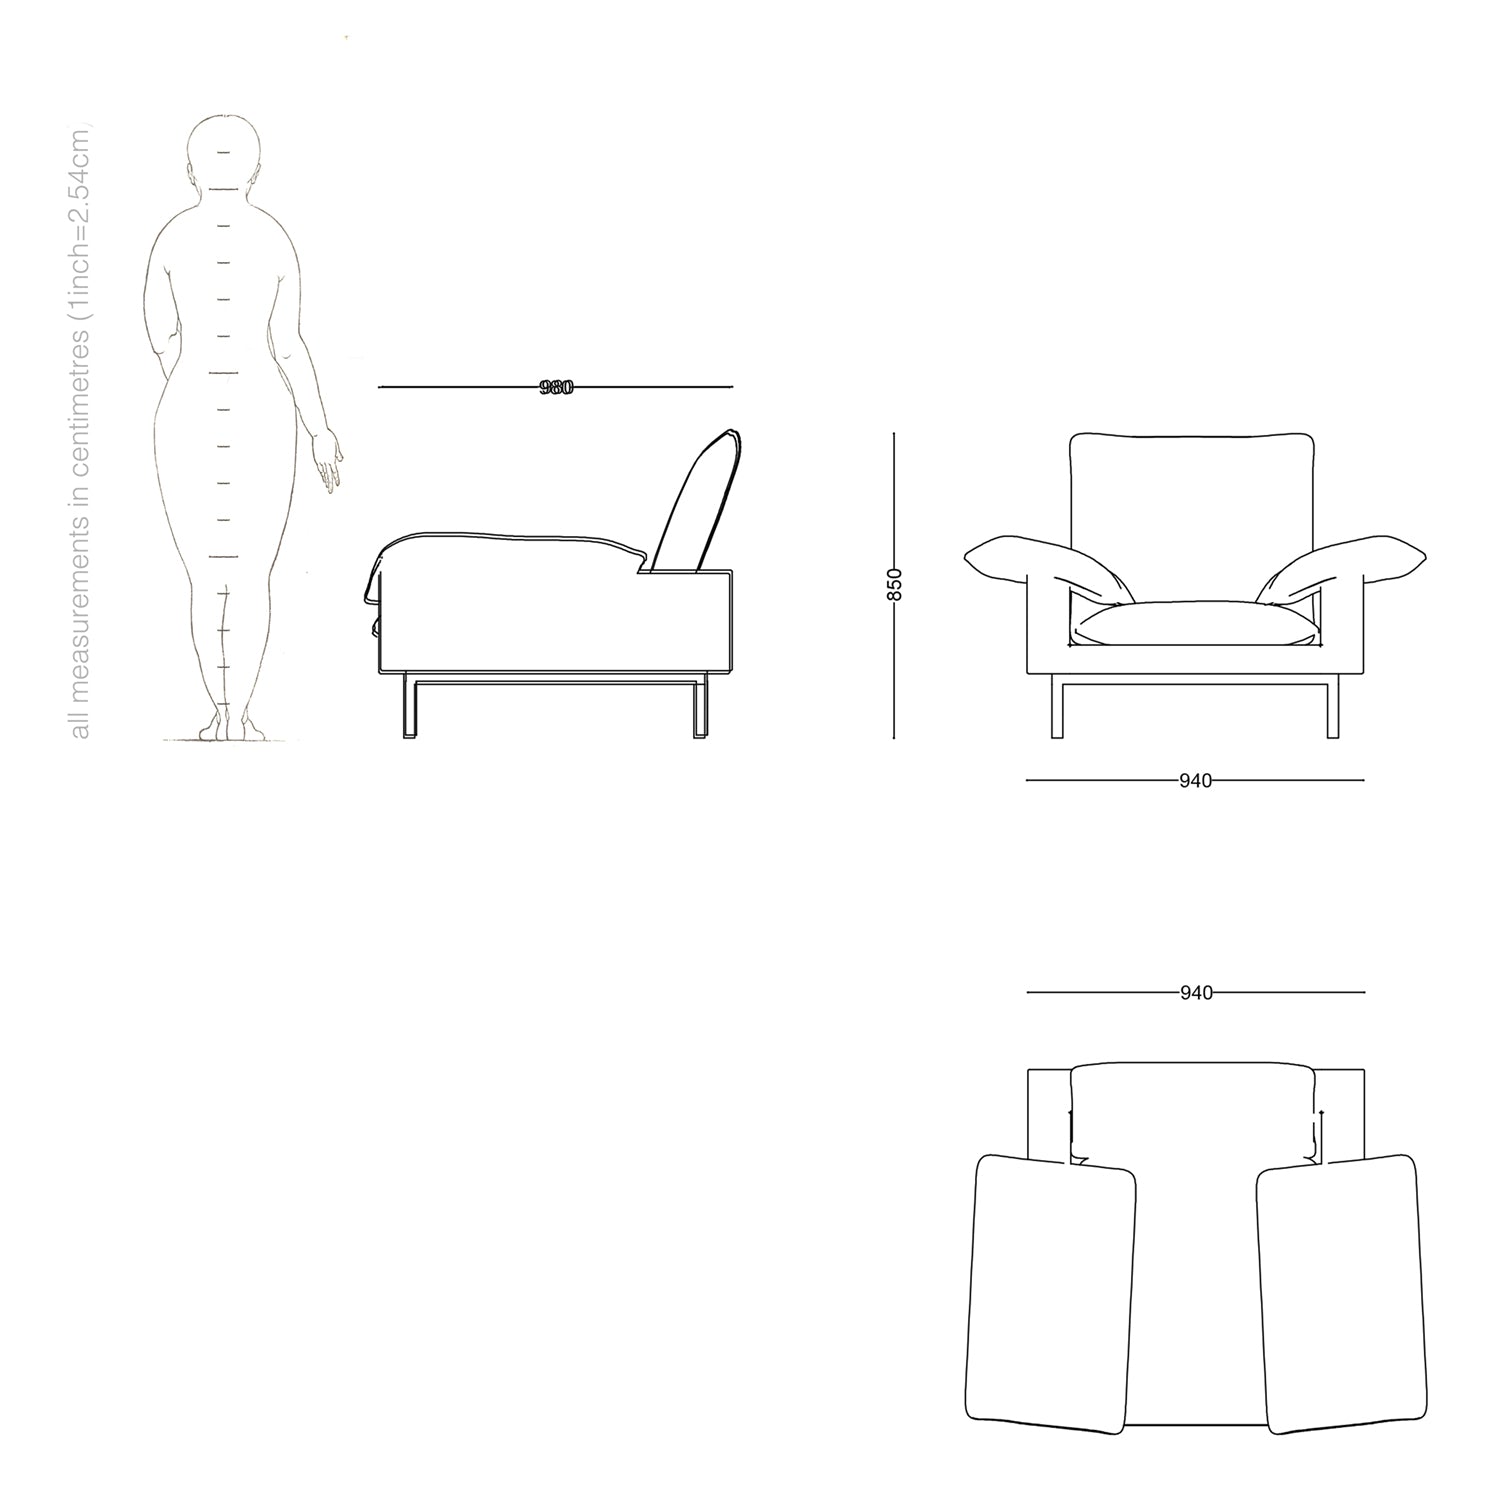 armchair drawing and dimensions.